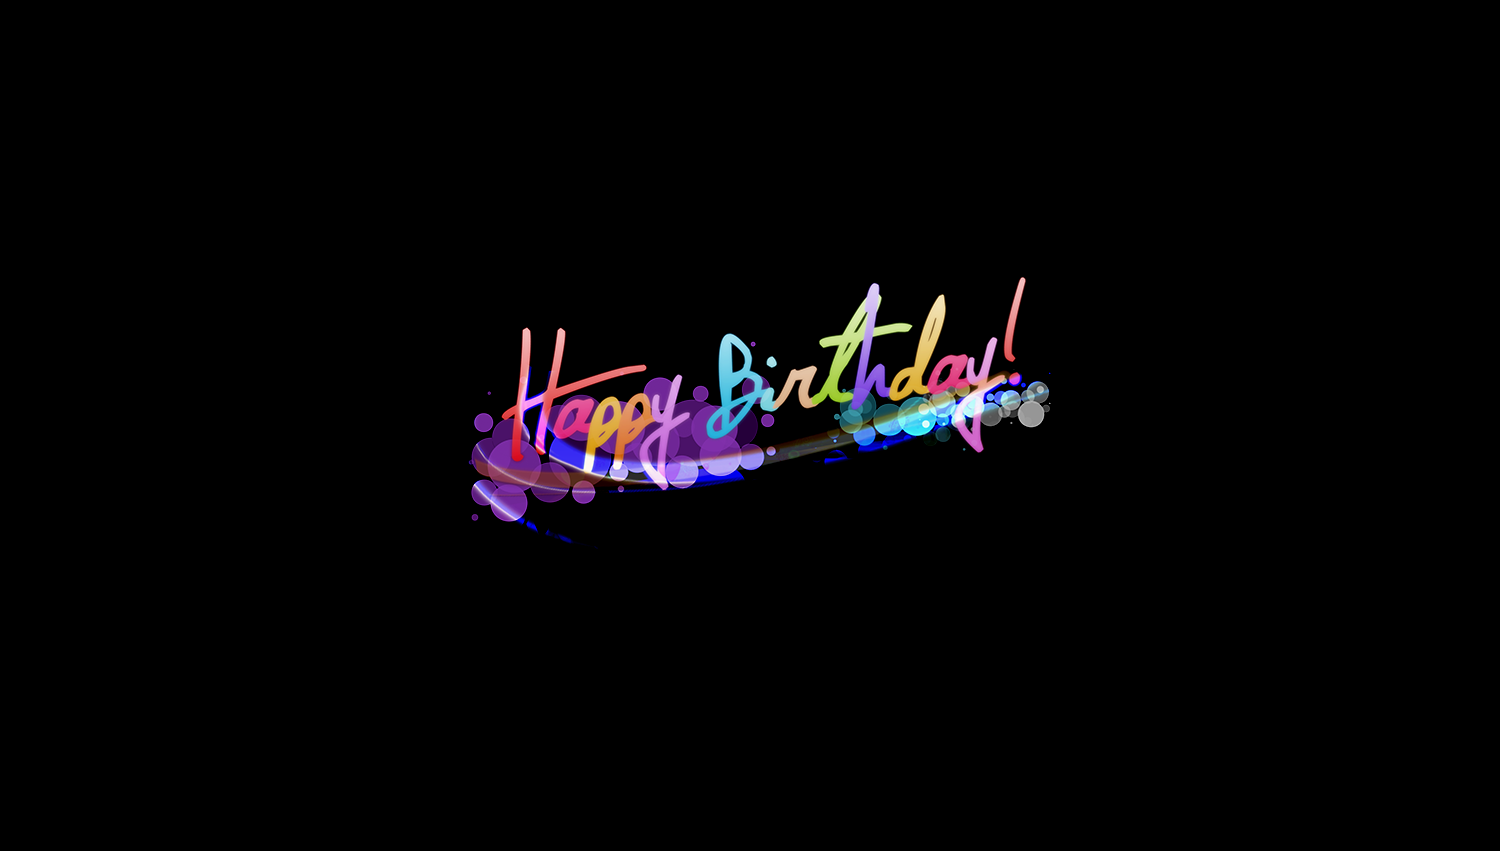 Free download Happy Birthday Wallpapers Download Free High ...